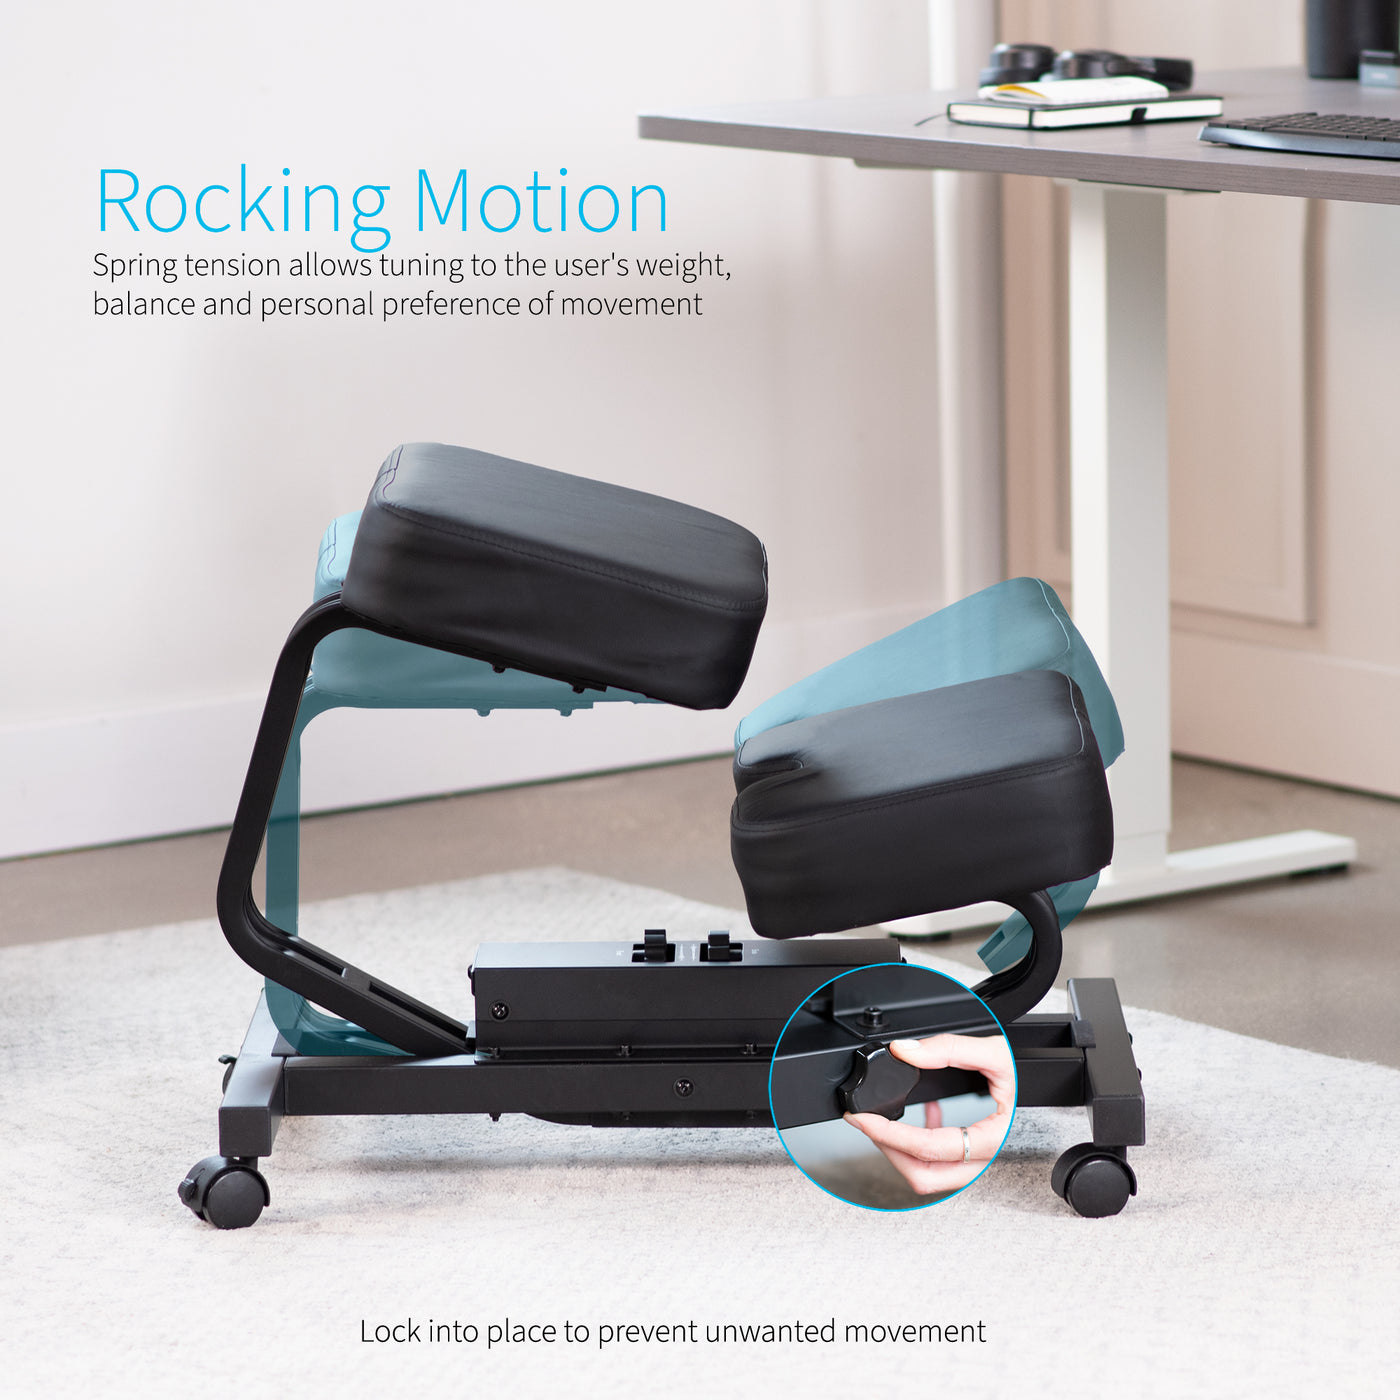 Mobile ergonomic padded rocking kneeling chair with locking casters.